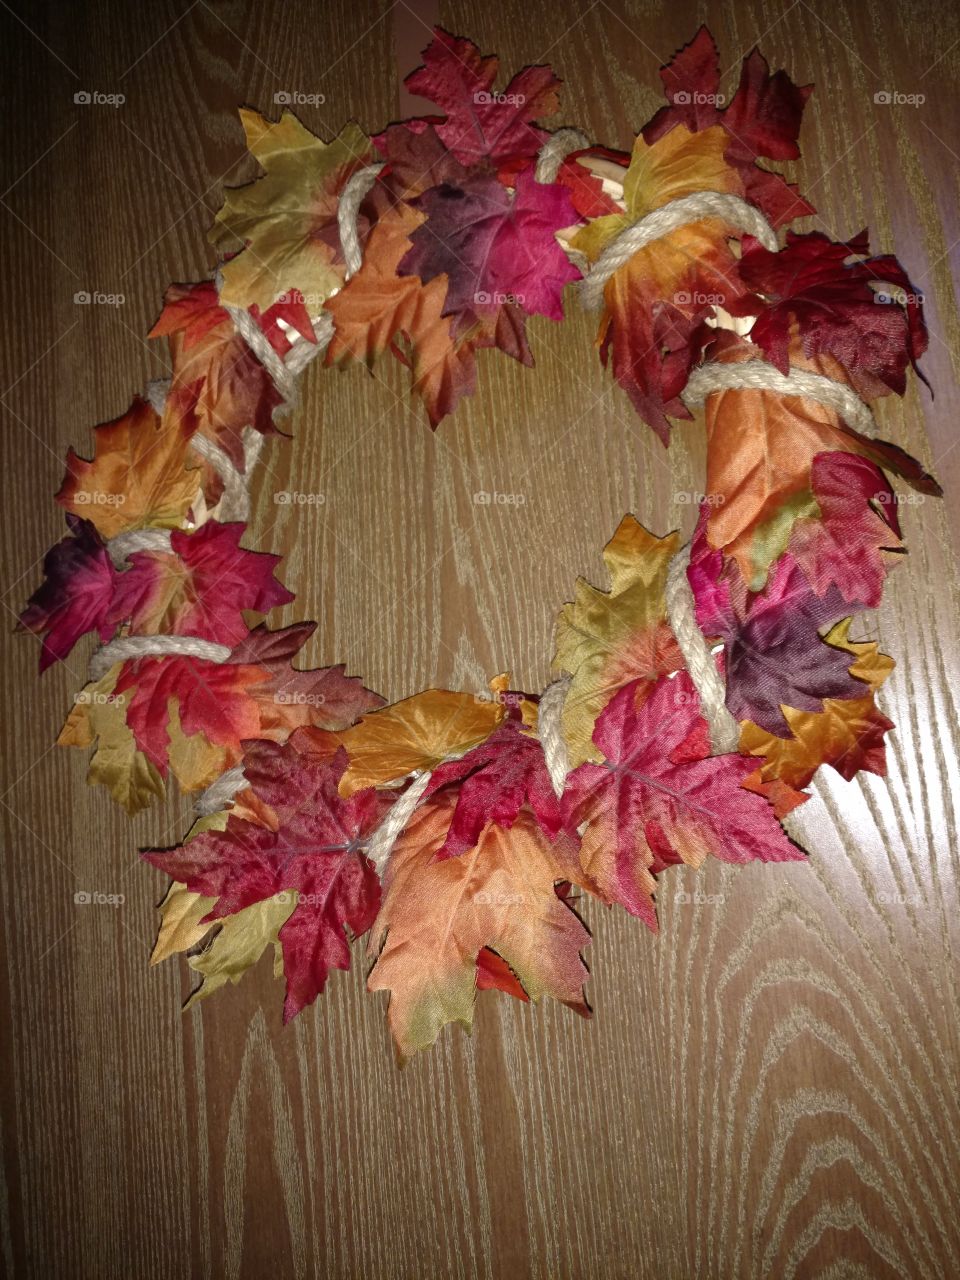 Autumn fall leaf wreath with rope holding it together